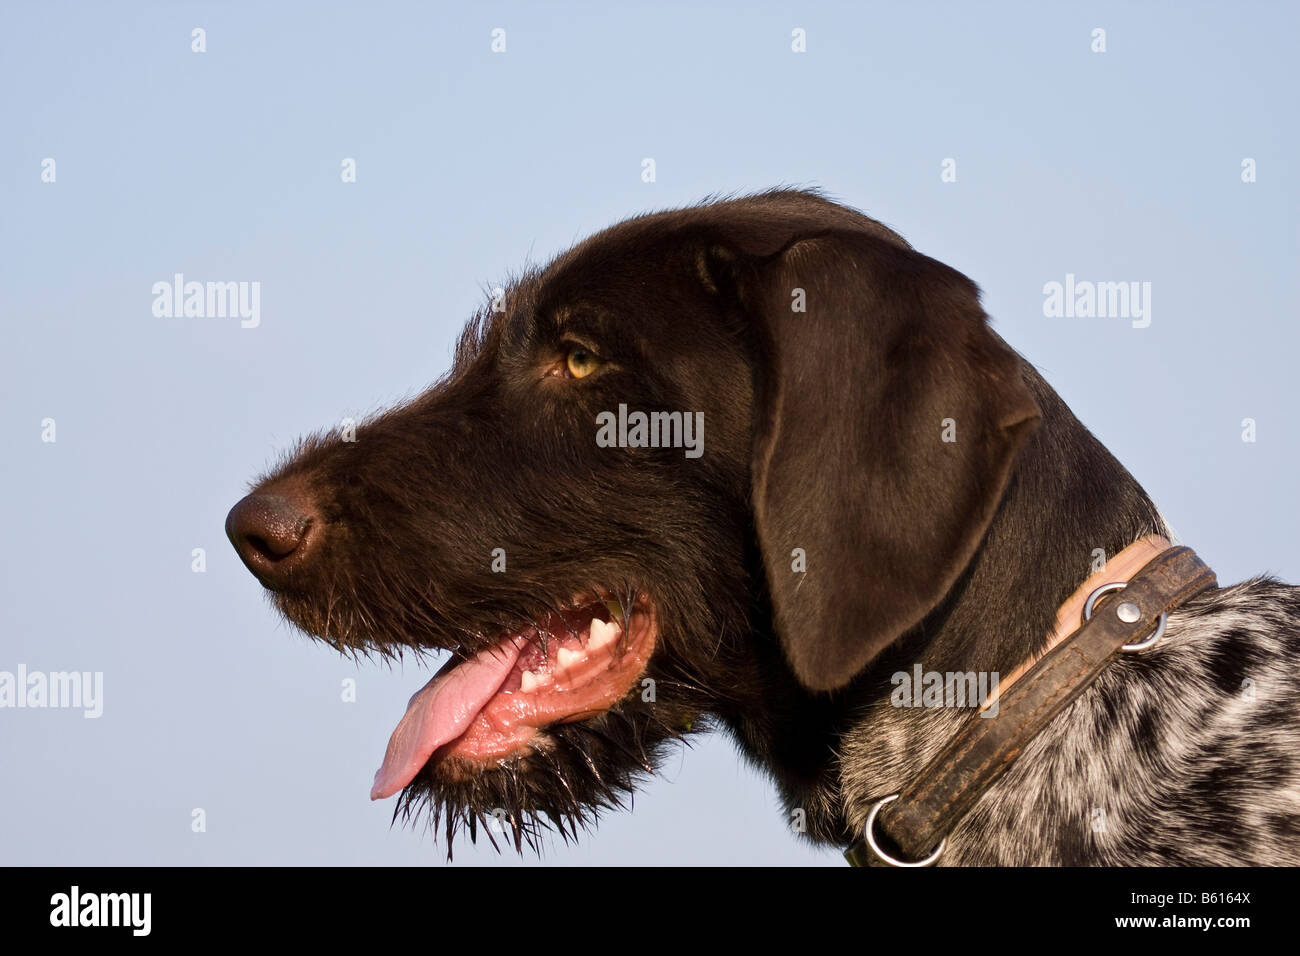 German Wirehaired Pointer, hunting dog, portrait Stock Photo